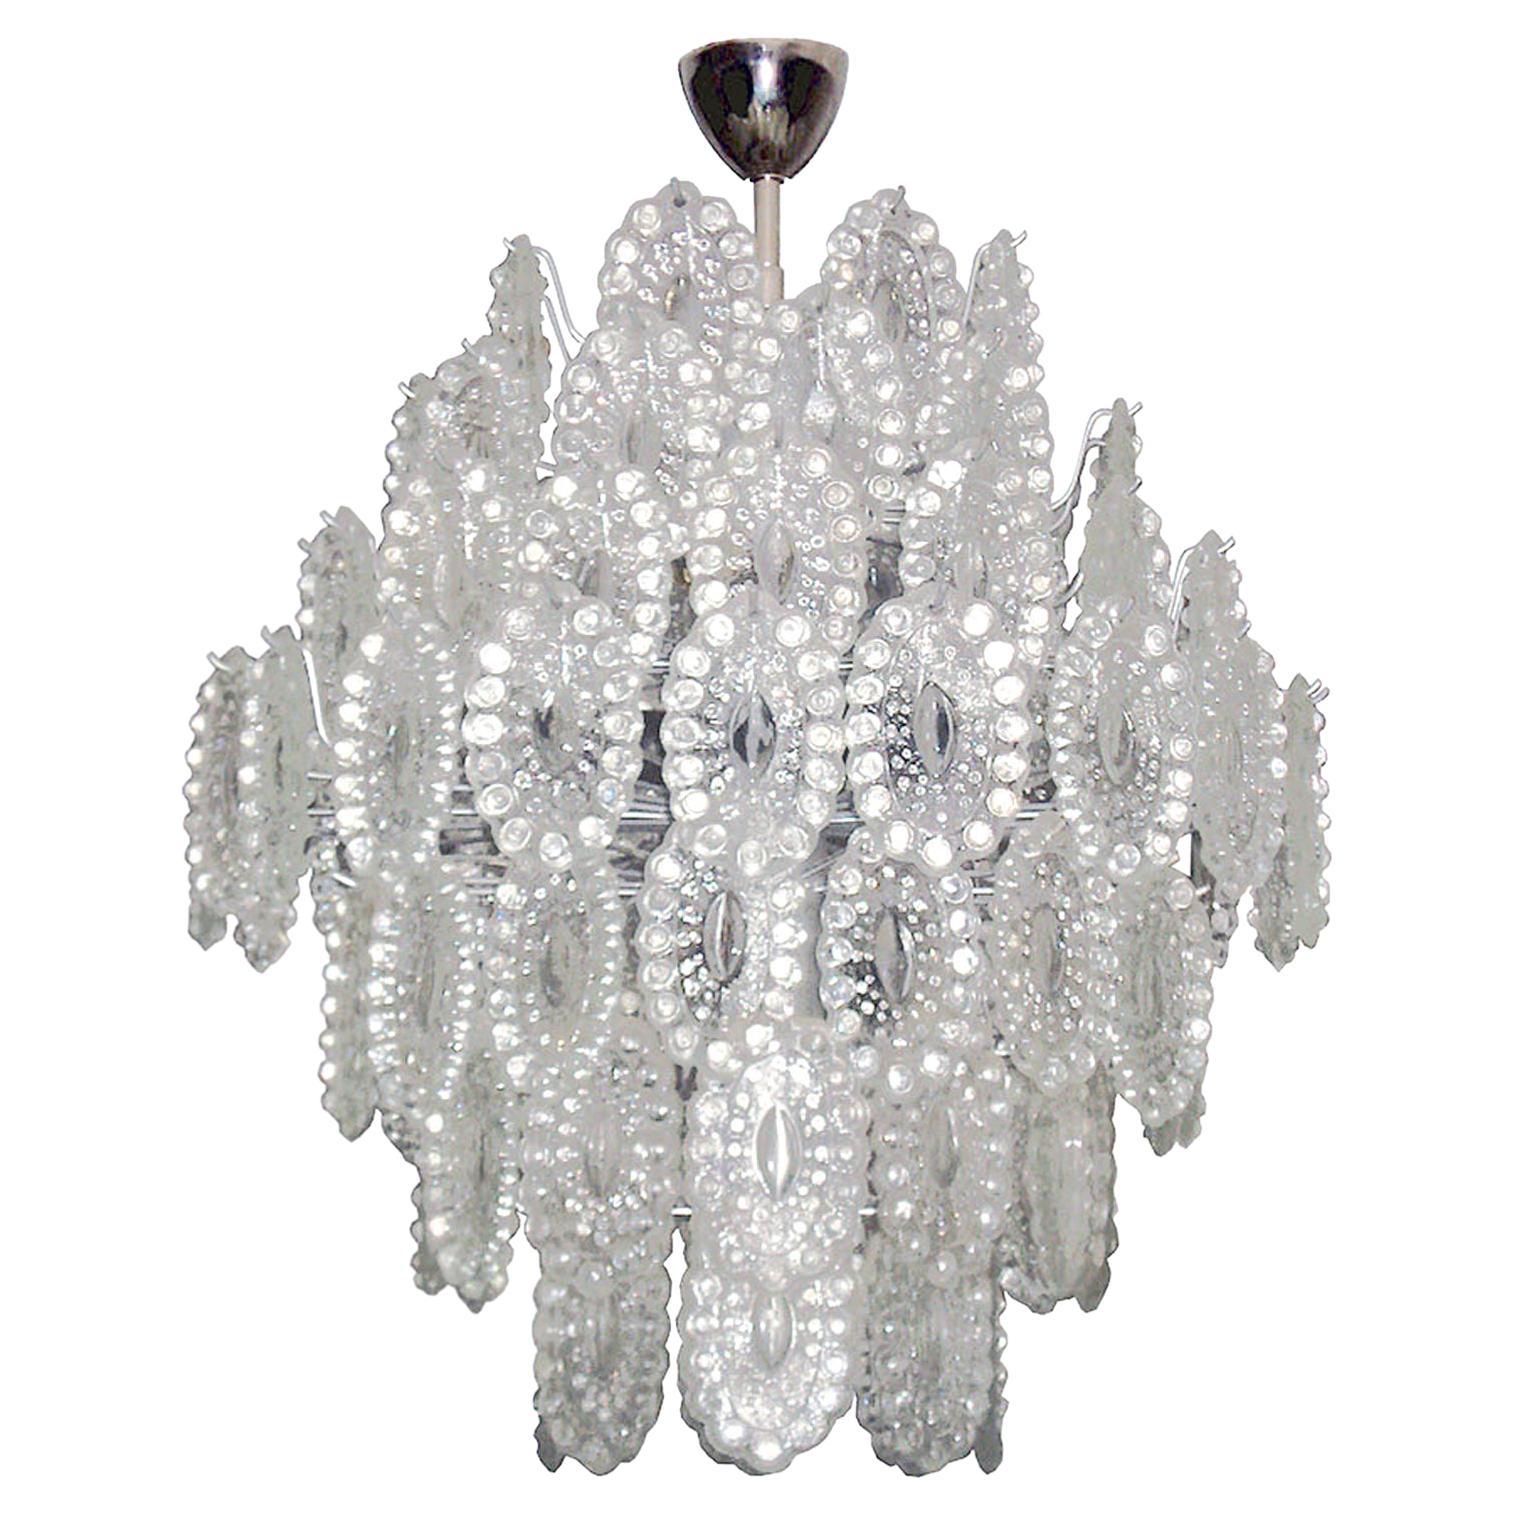 Italian Crystal Glass Chandelier in the Style of Mazzega, 1 of 2